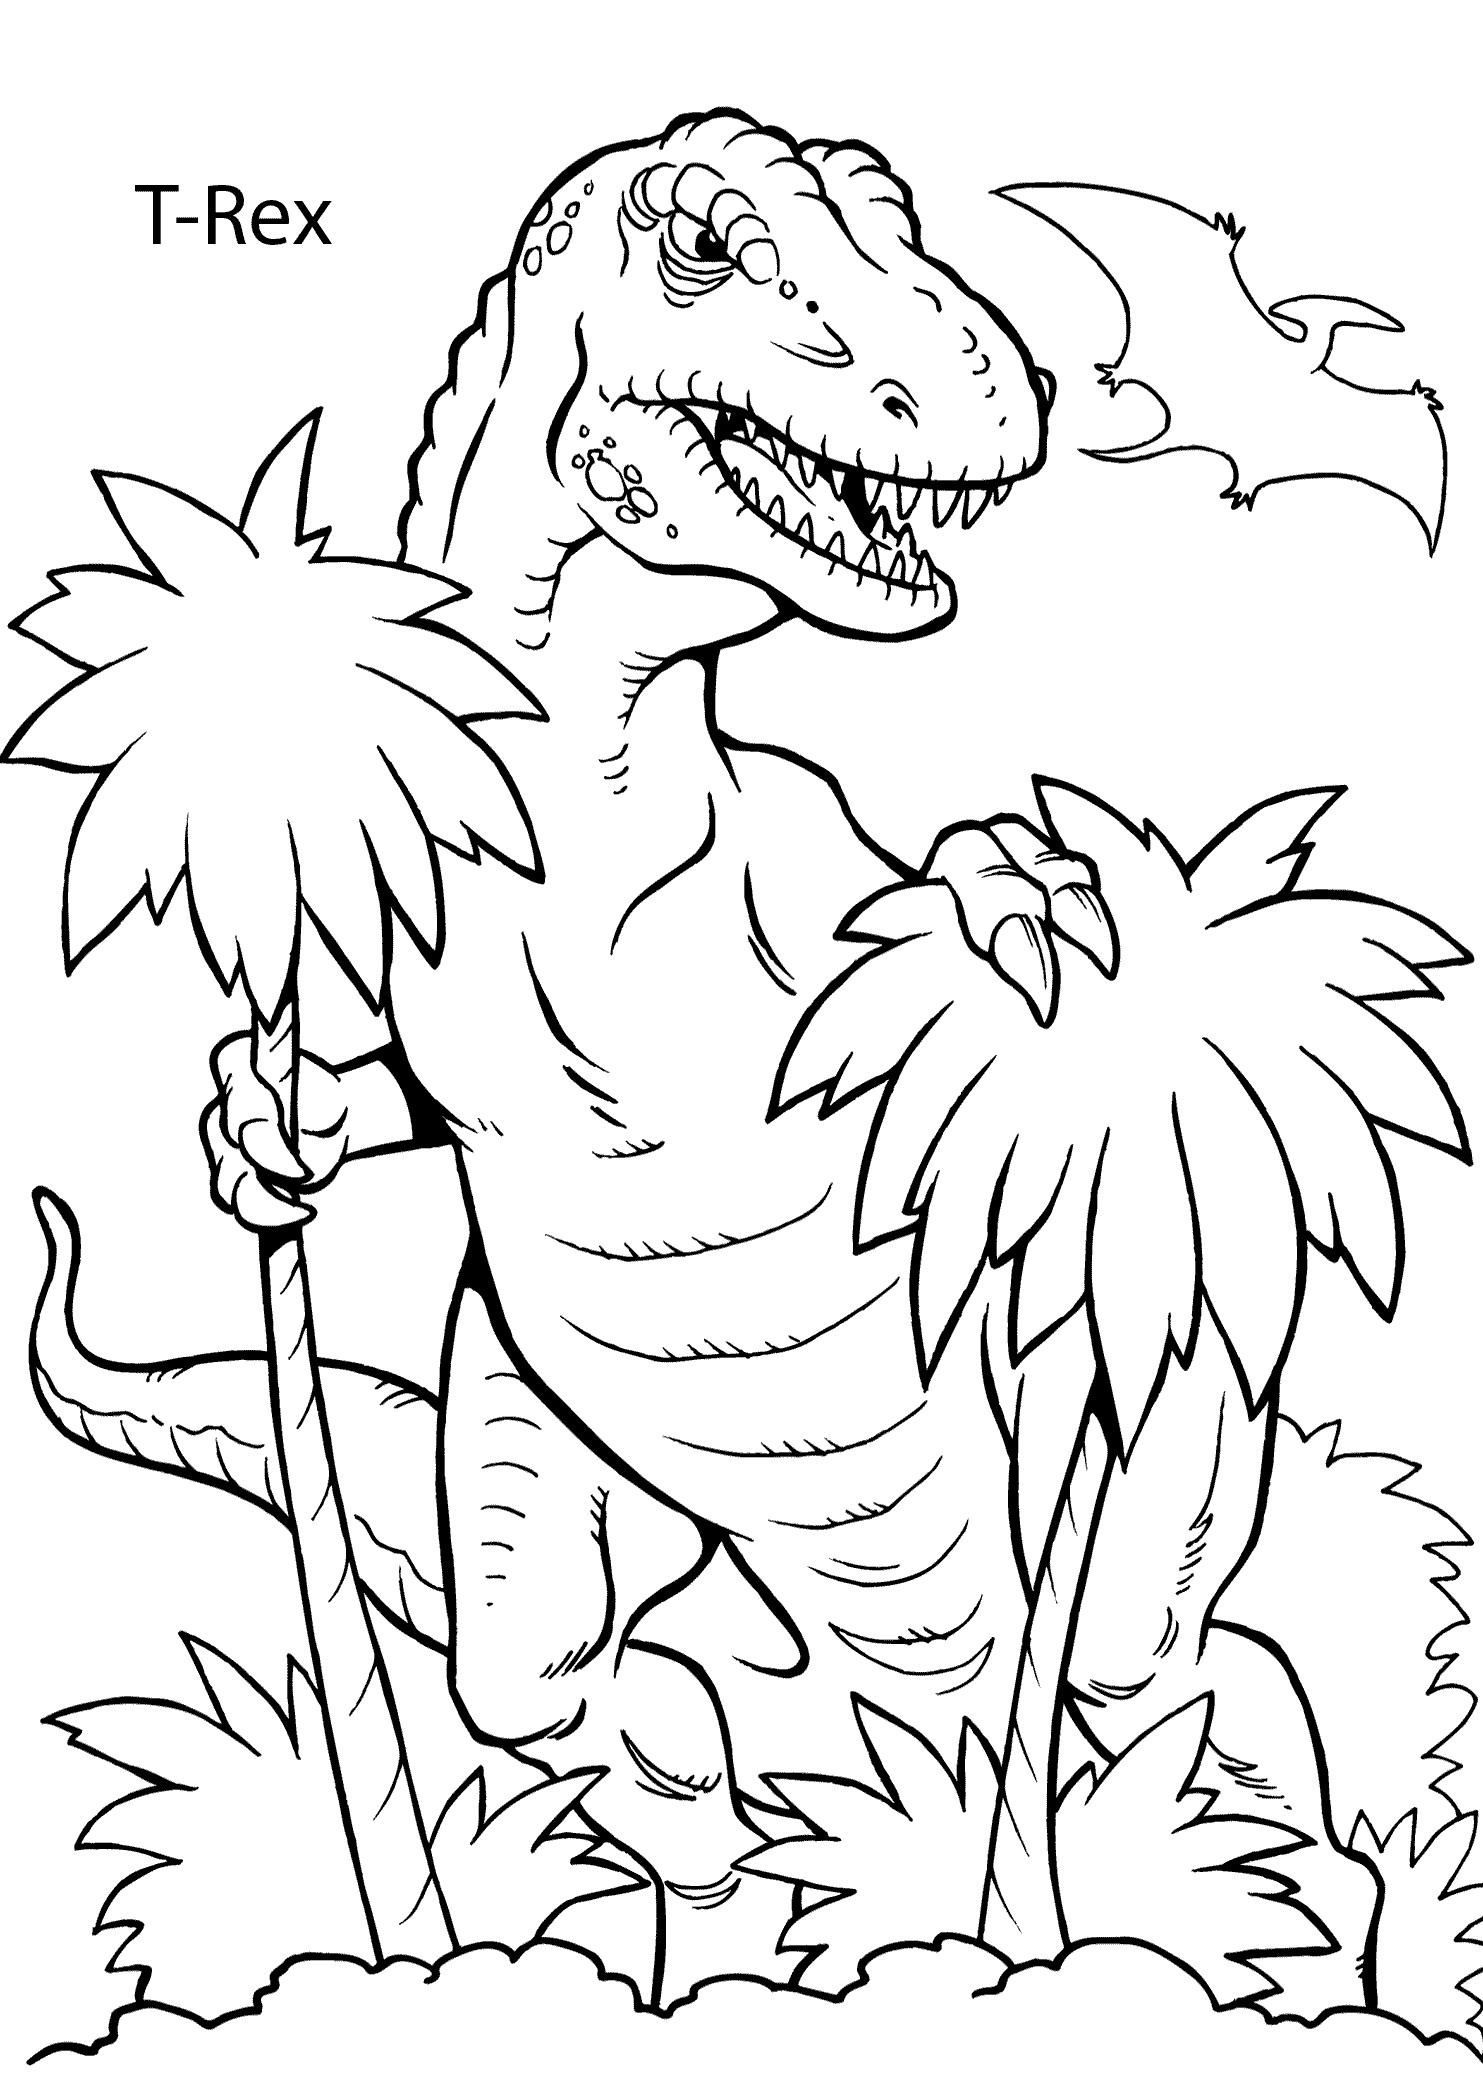 jurassic-park-dinosaurs-coloring-pages-bubakids